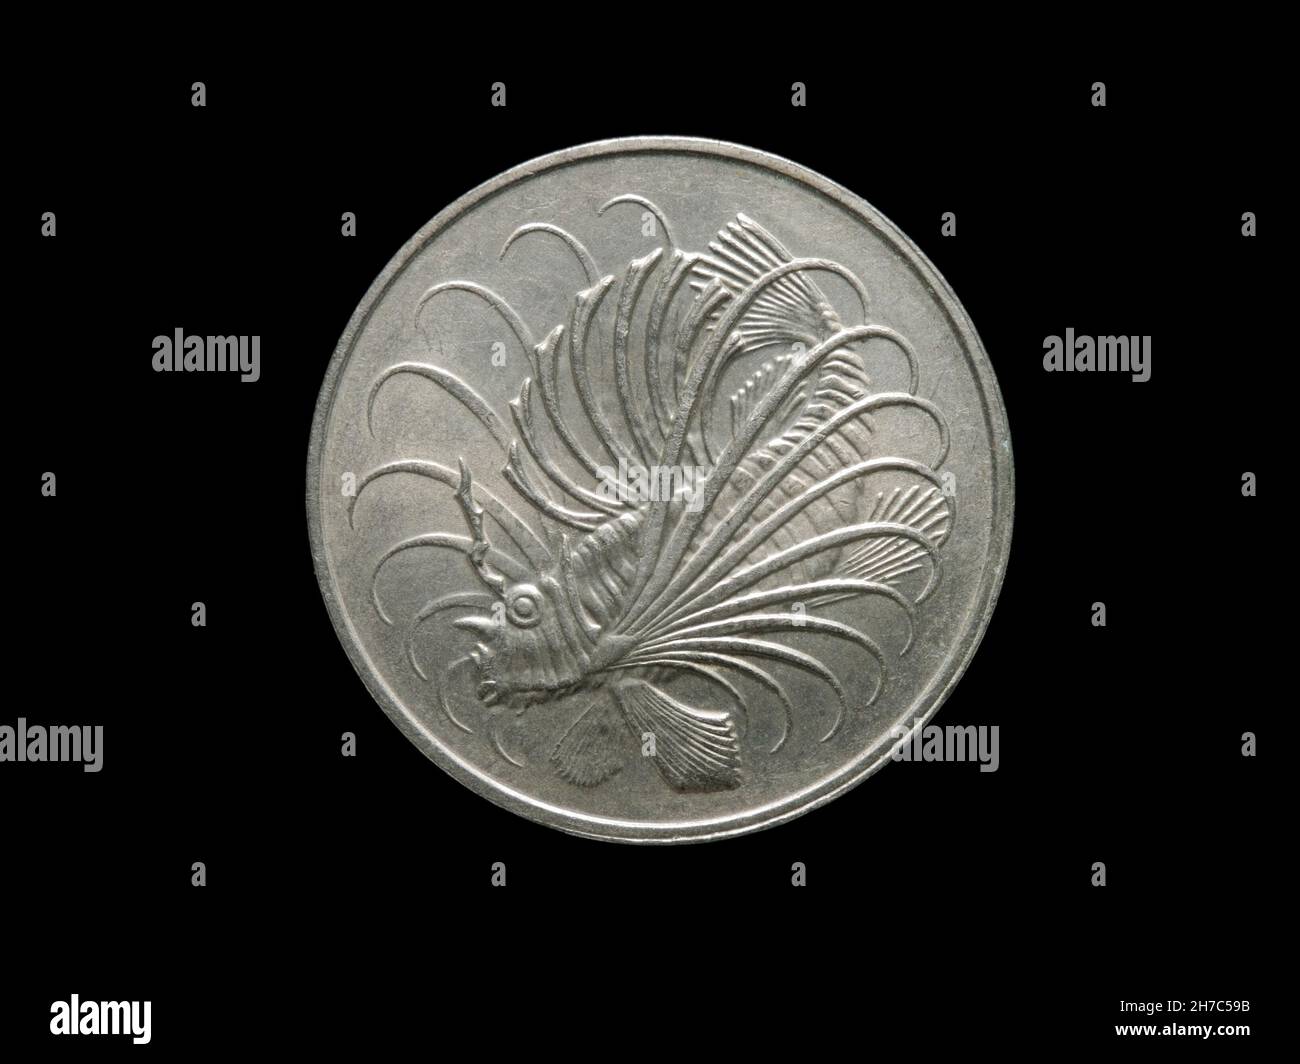 Singapore 50 Cents with Lionfish Stock Photo